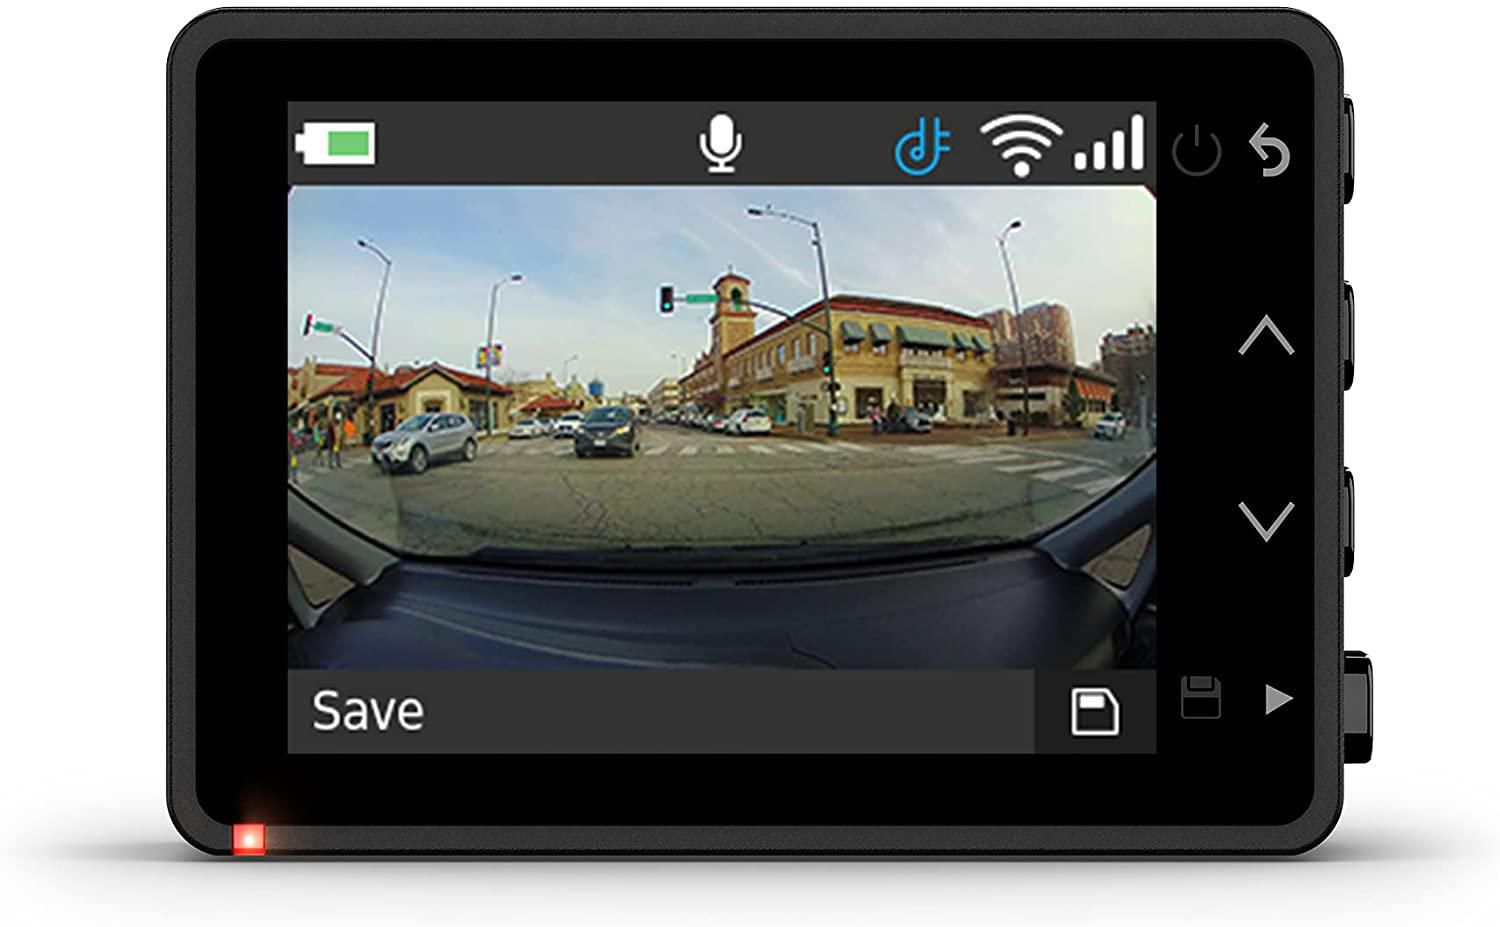 Garmin Dash Cam 67W, 1440p and Extra-Wide 180-degree FOV, Monitor Your  Vehicle While Away w/ New Connected Features, Voice Control, Compact and